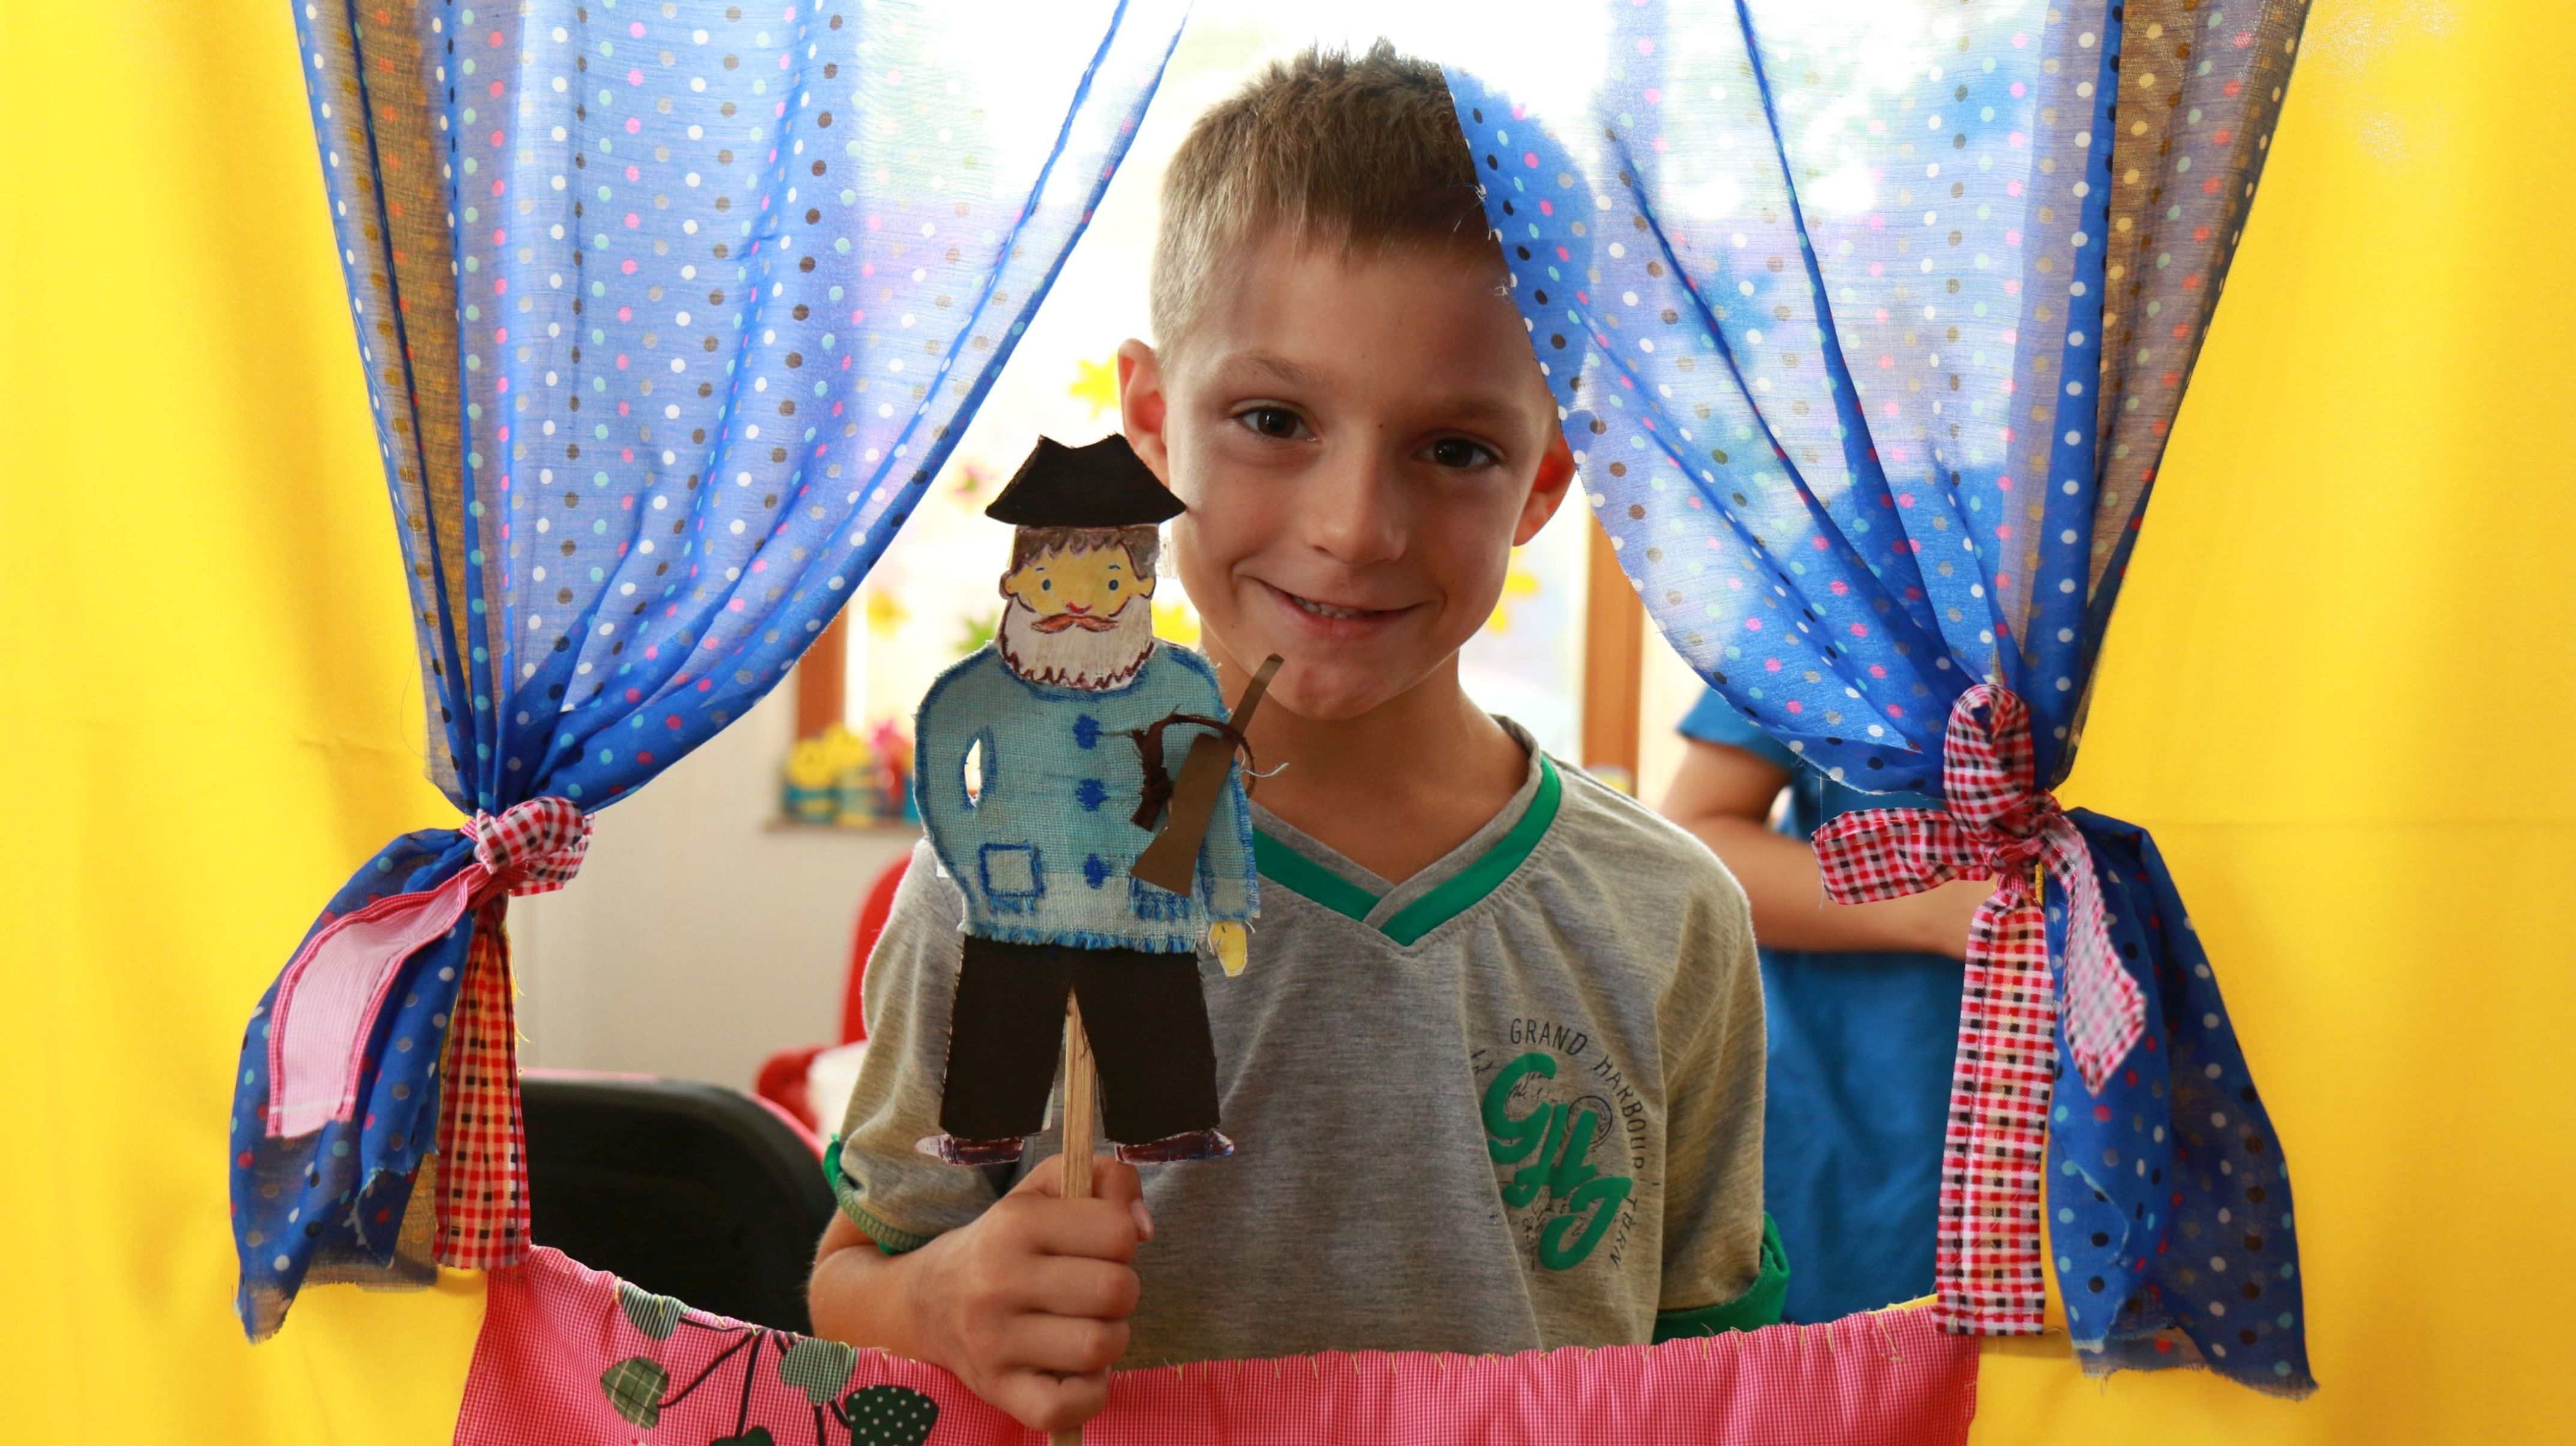 David is participating in a small-scale puppet show 